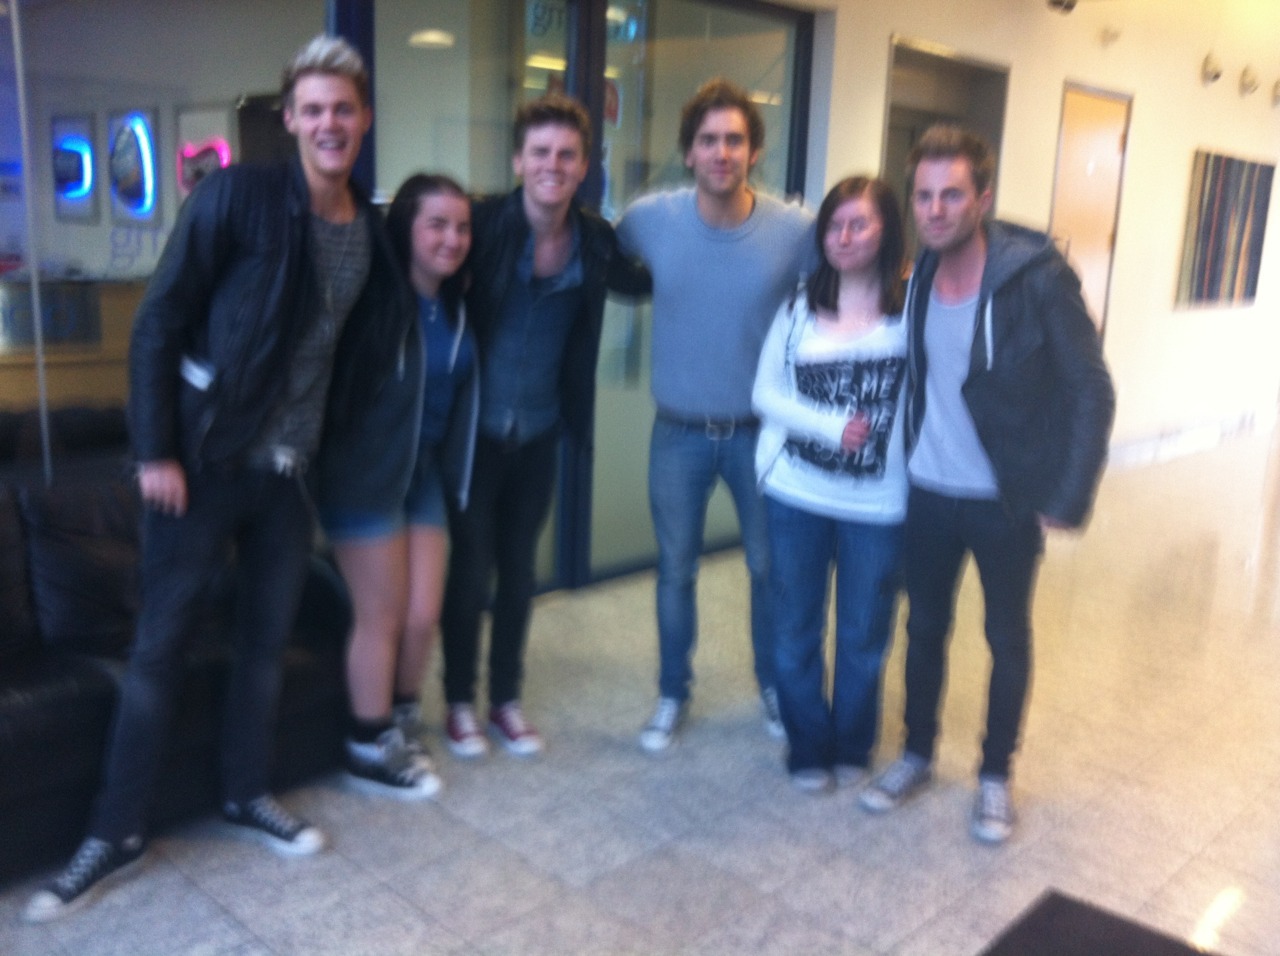 Lawson - When She Was Mine Radio Tour. Manchester. 18th &amp; 19th April 2012.Real